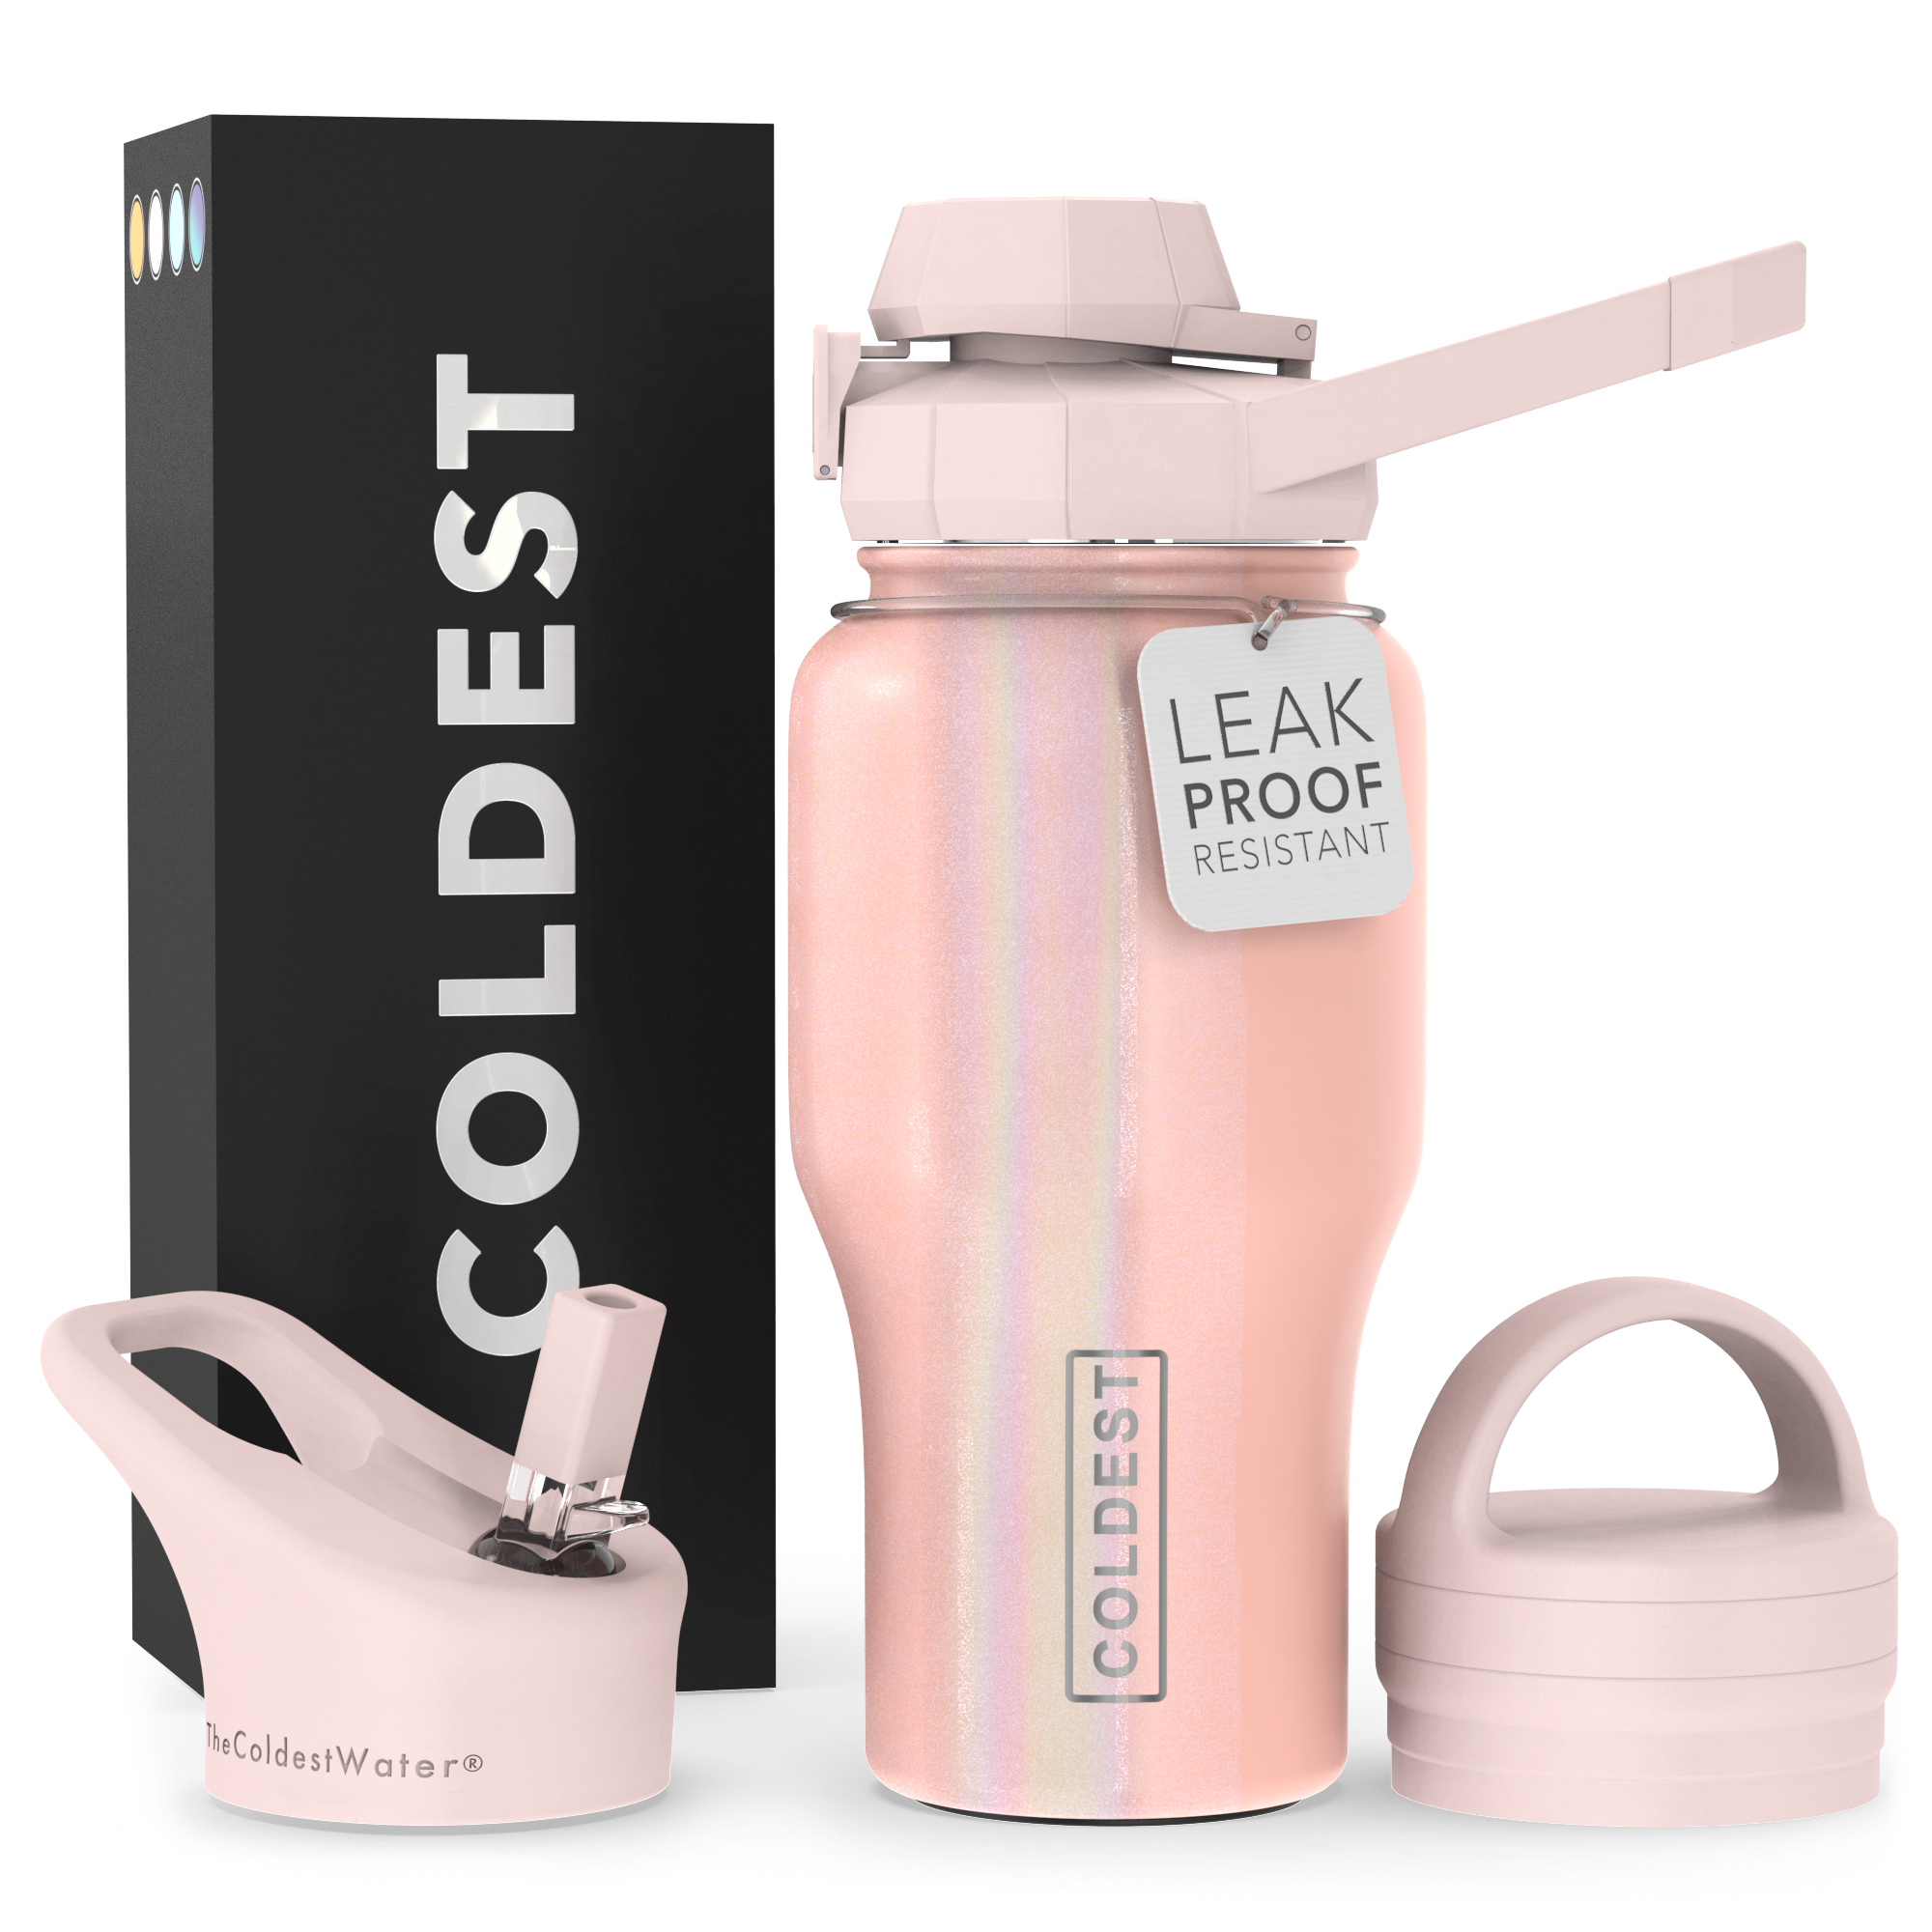 Pink insulated stainless steel water bottle by Owala: Lead-free! (This is  the only product from this brand that I have tested)